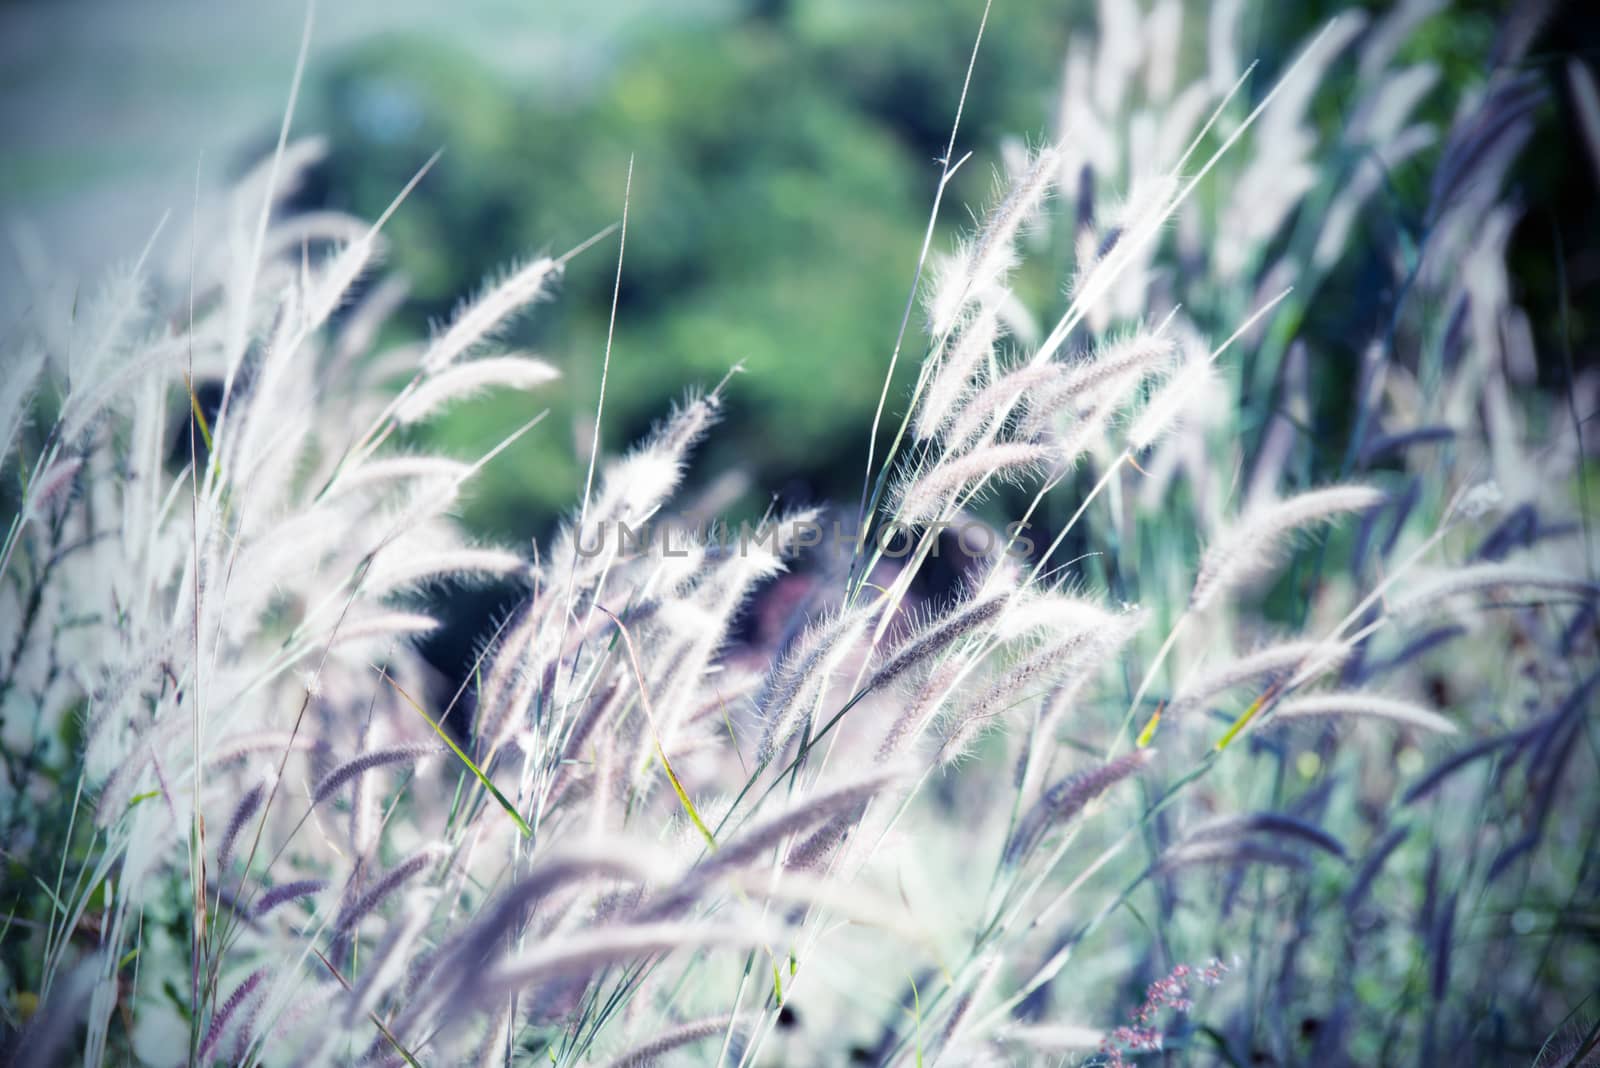 Vintage tone flower of grass in evening time 